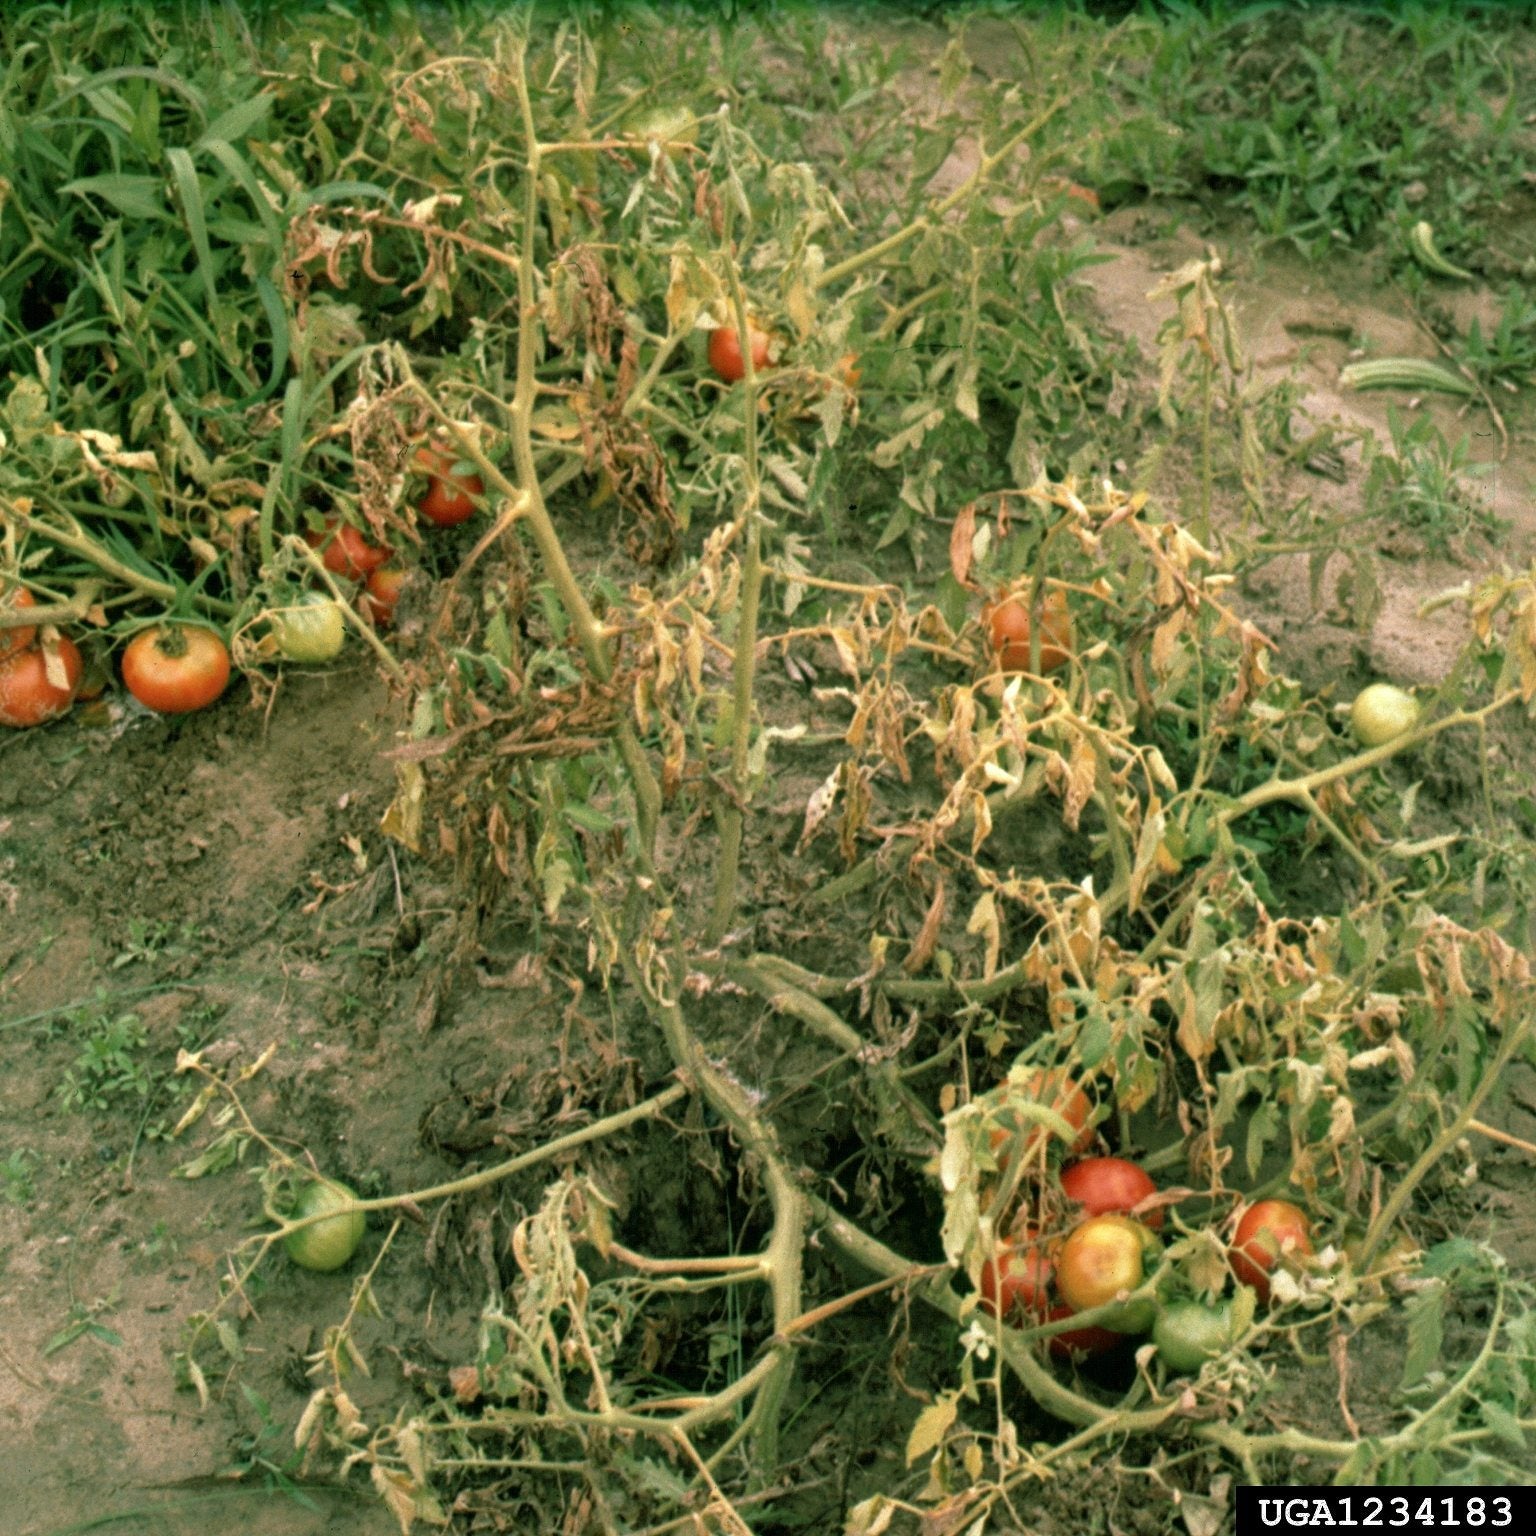 Tomato Southern Blight Treatment How To Fix Tomato Plants With Southern Blight,How To Store Peaches Before Canning